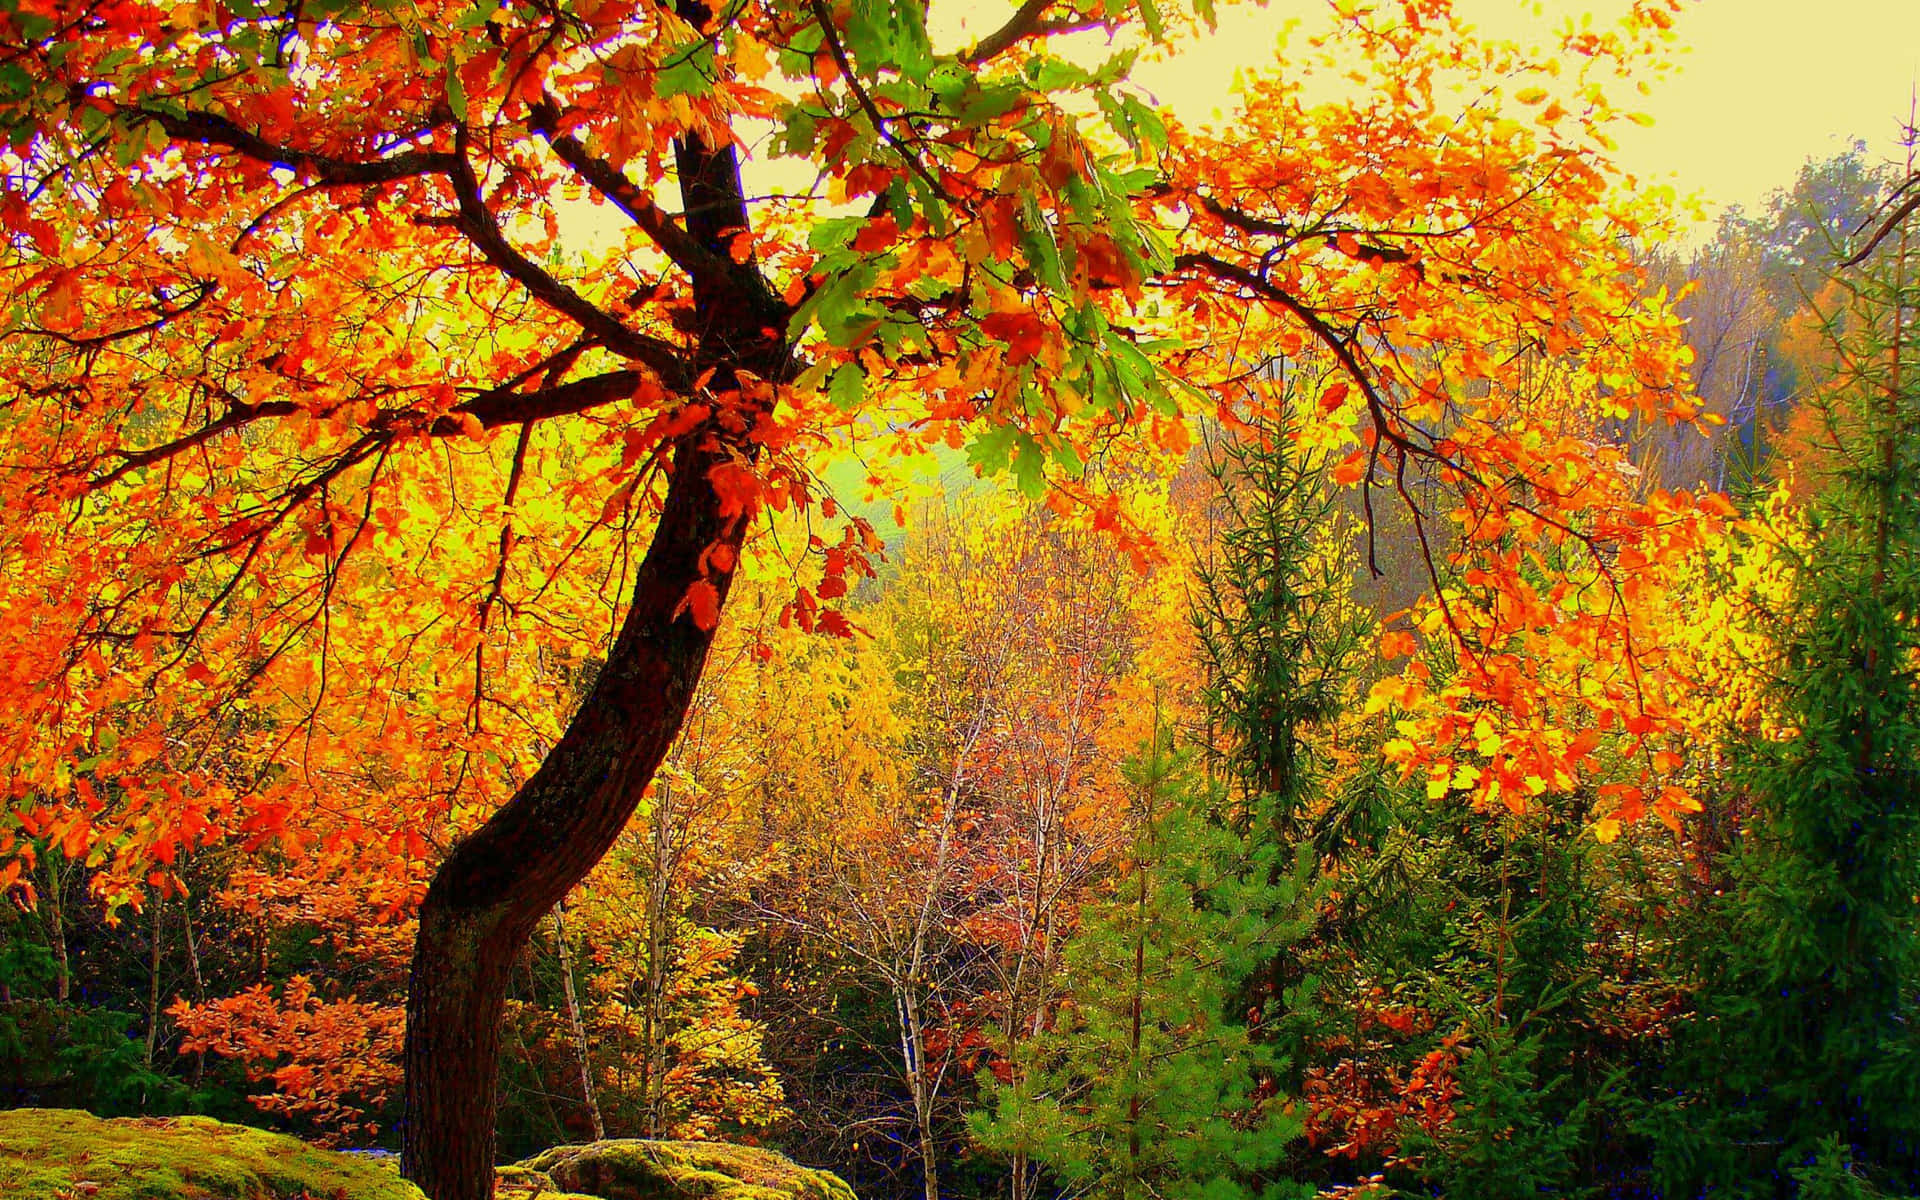 "The Beauty of Nature's Fall Artwork" Wallpaper